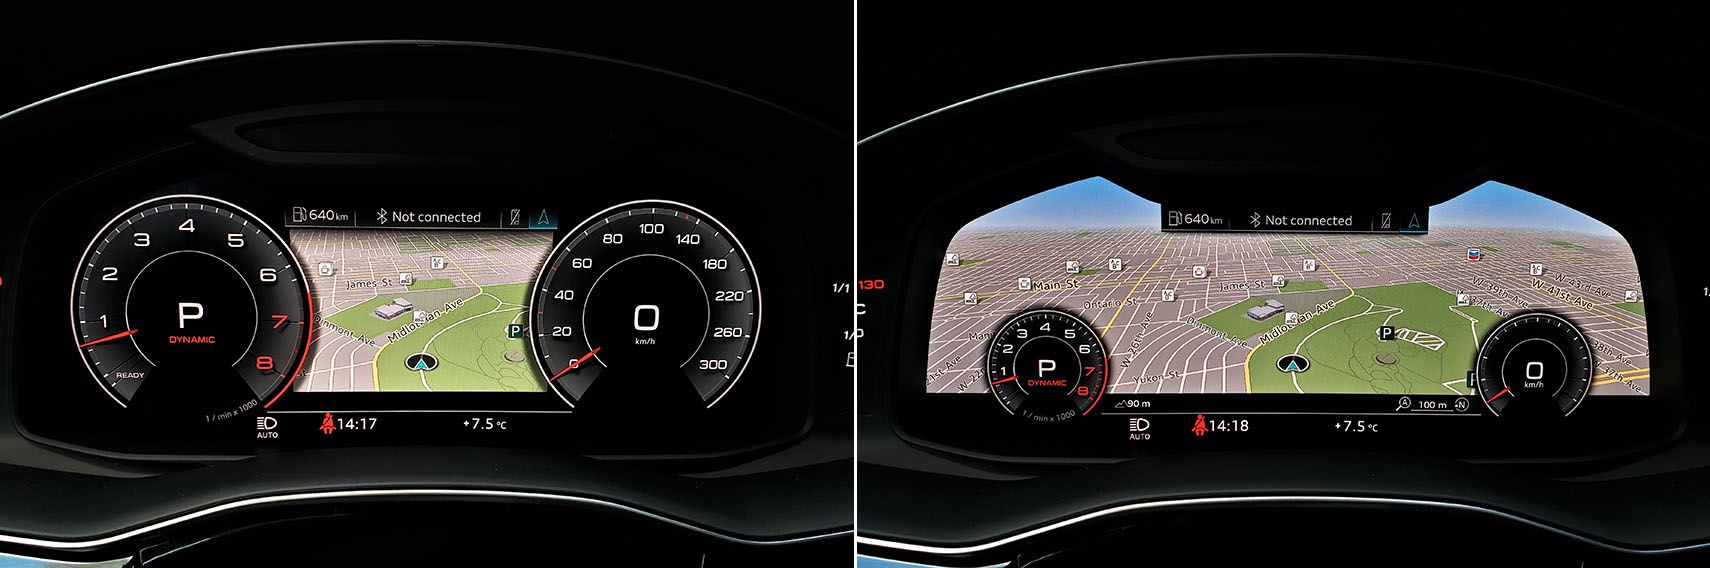 The Audi Virtual Cockpit shown in regular and expanded view option.